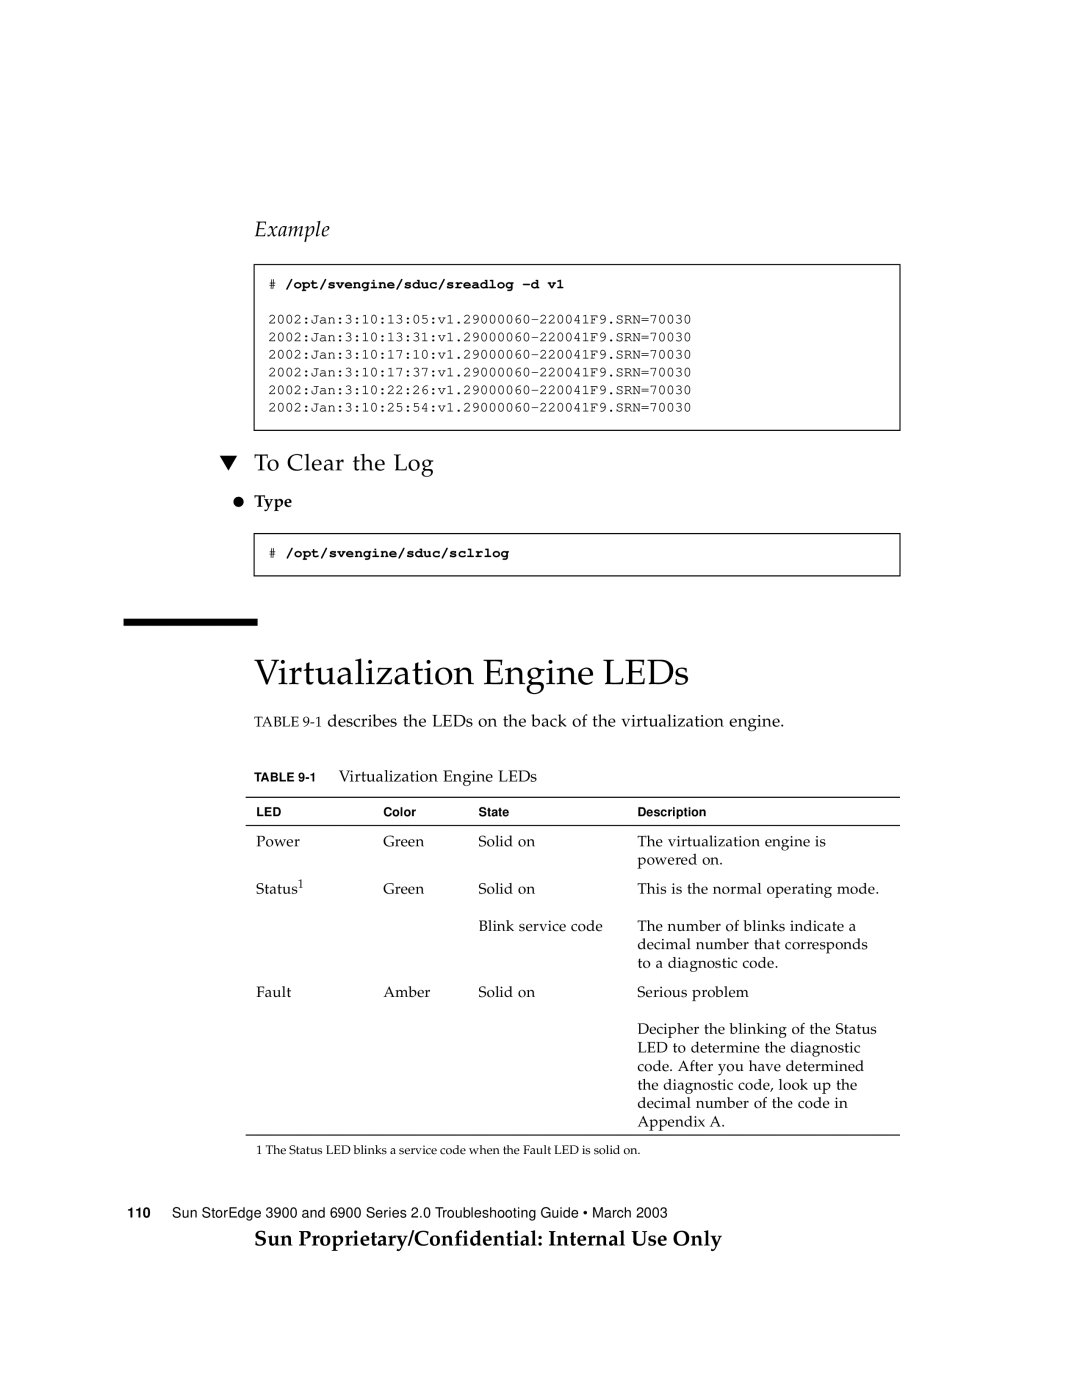 Sun Microsystems 3900, 6900 manual Virtualization Engine LEDs, To Clear the Log, Example, # /opt/svengine/sduc/sreadlog -d 